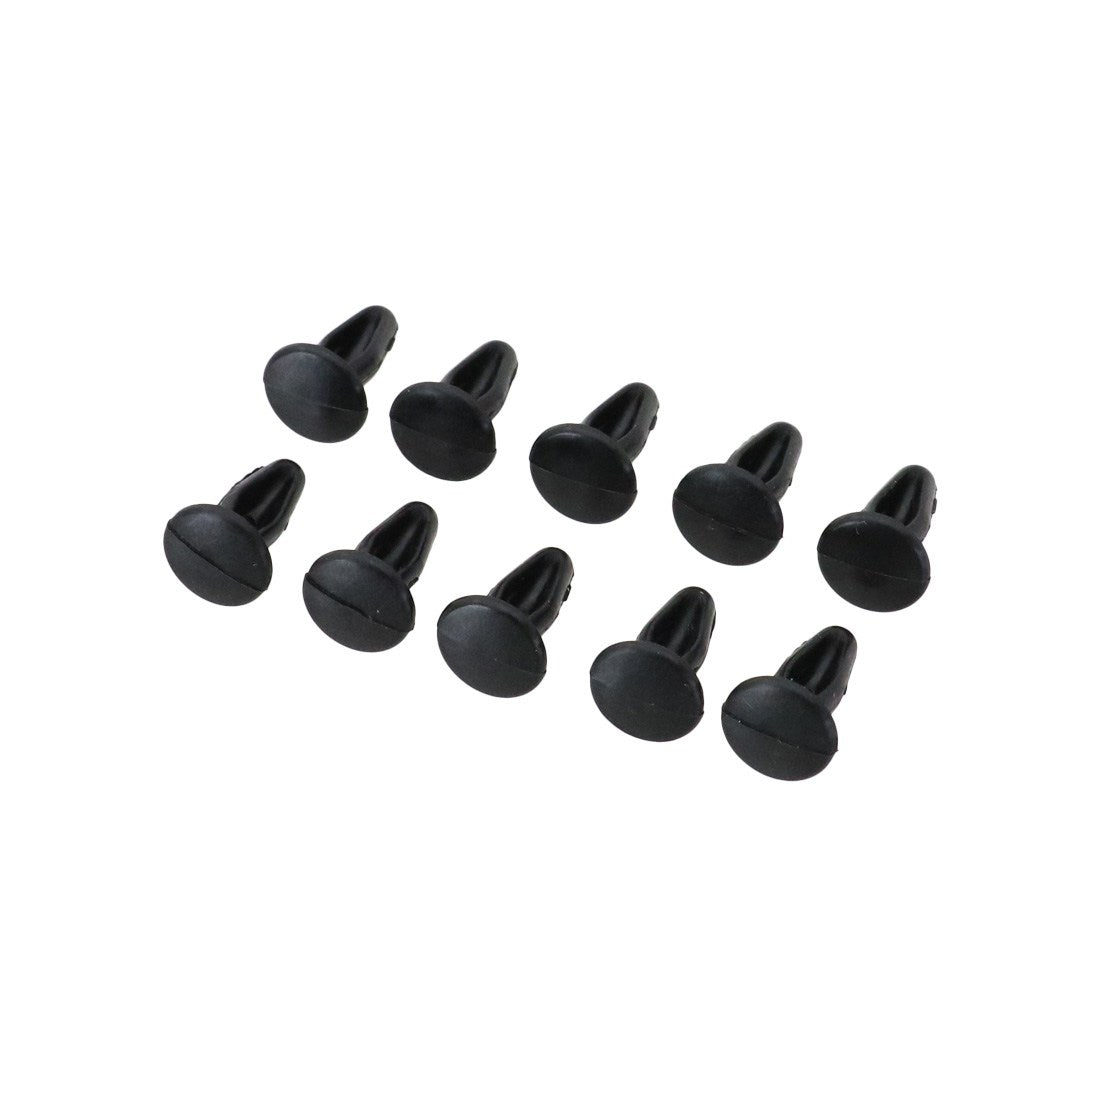 Wagtail Pivot Limiter Pins - 10 Pack Bottom Oblique 10 Pack View